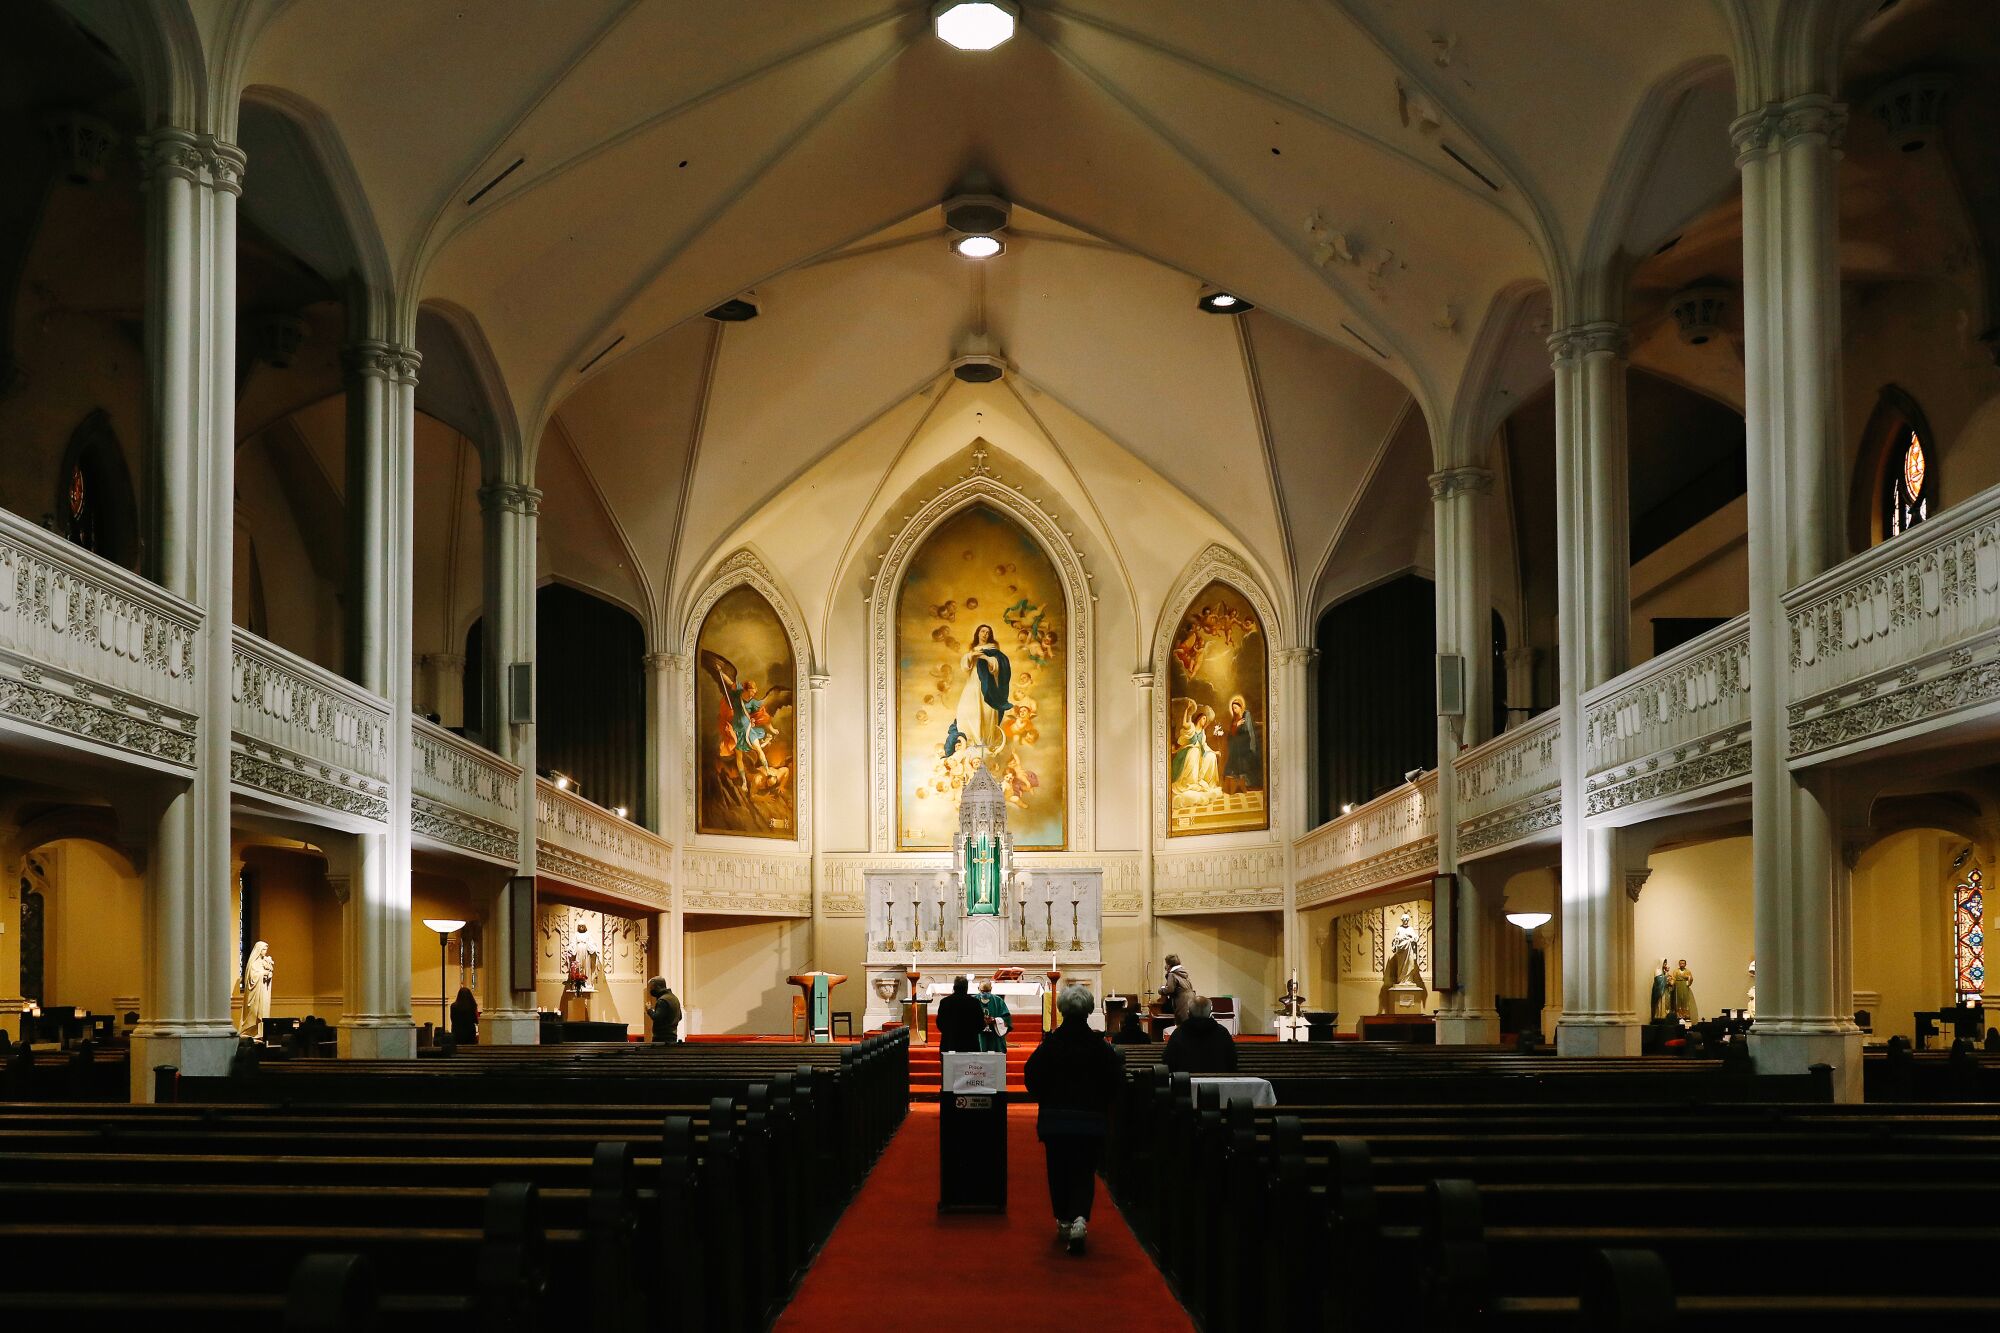 A church interior with gold paintings above the altar.